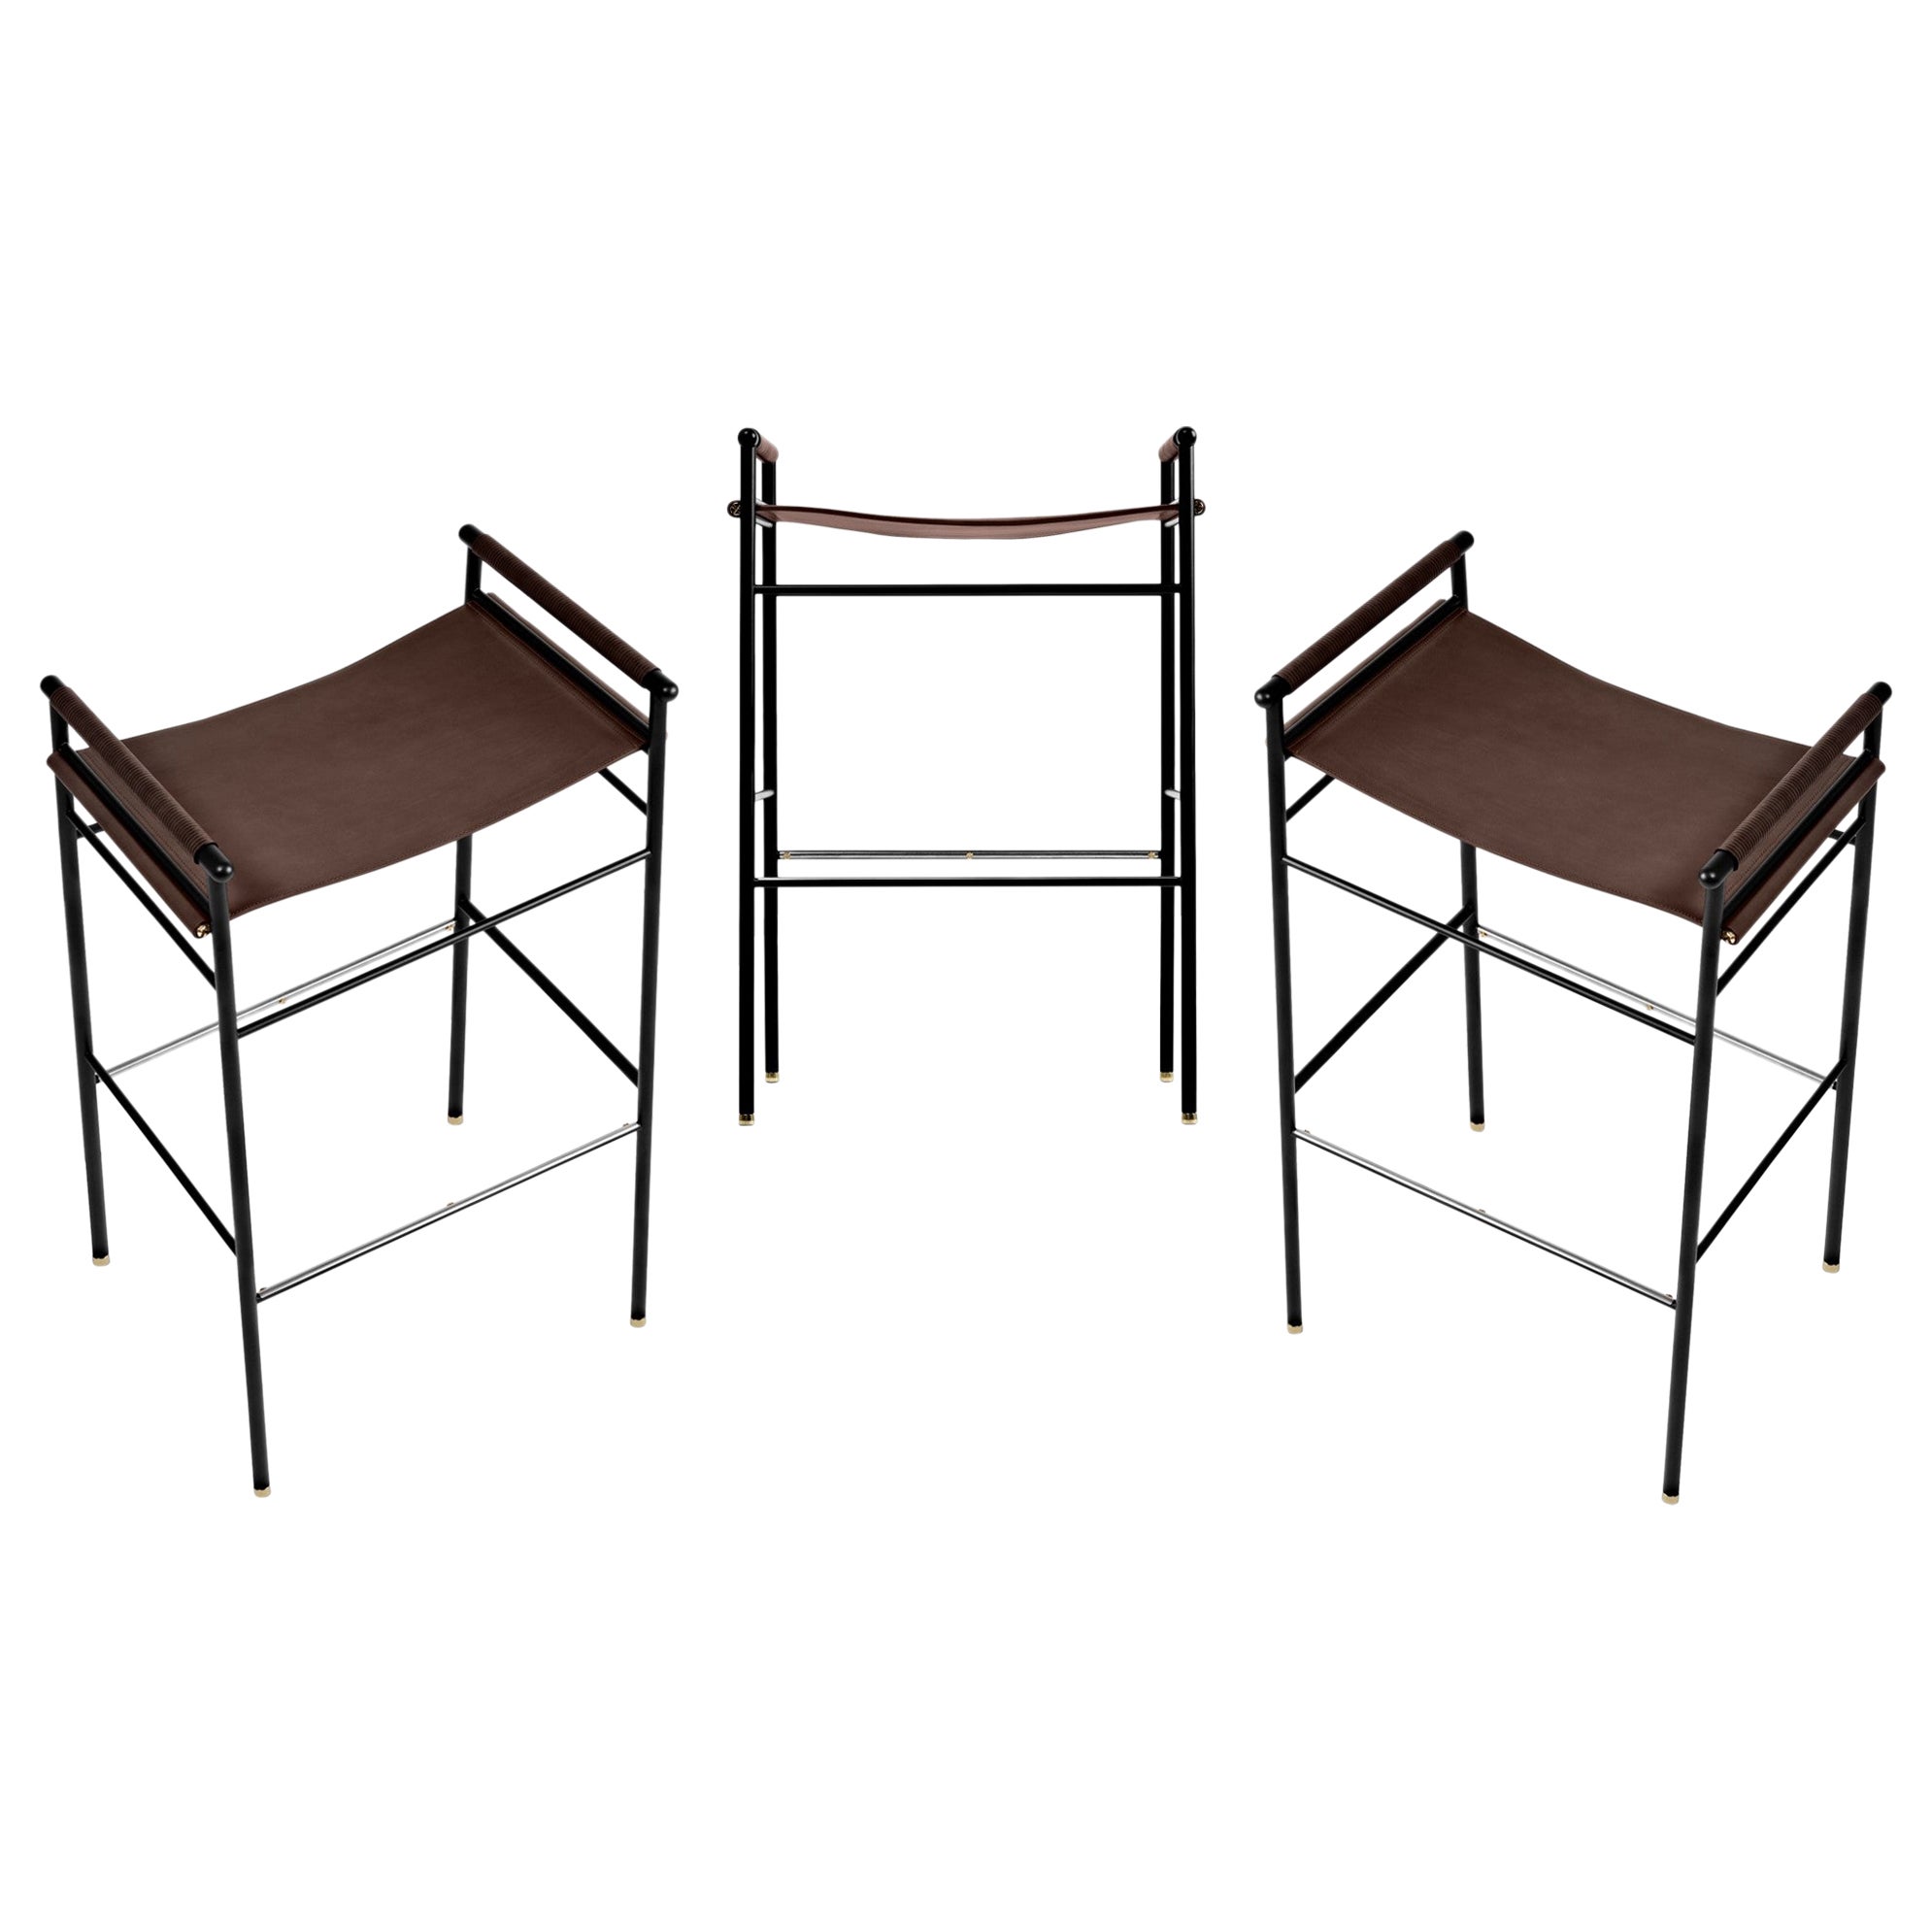 Set of 3 "Repose" Contemporary Barstool Dark Brown Saddle Black Rubbered Frame For Sale